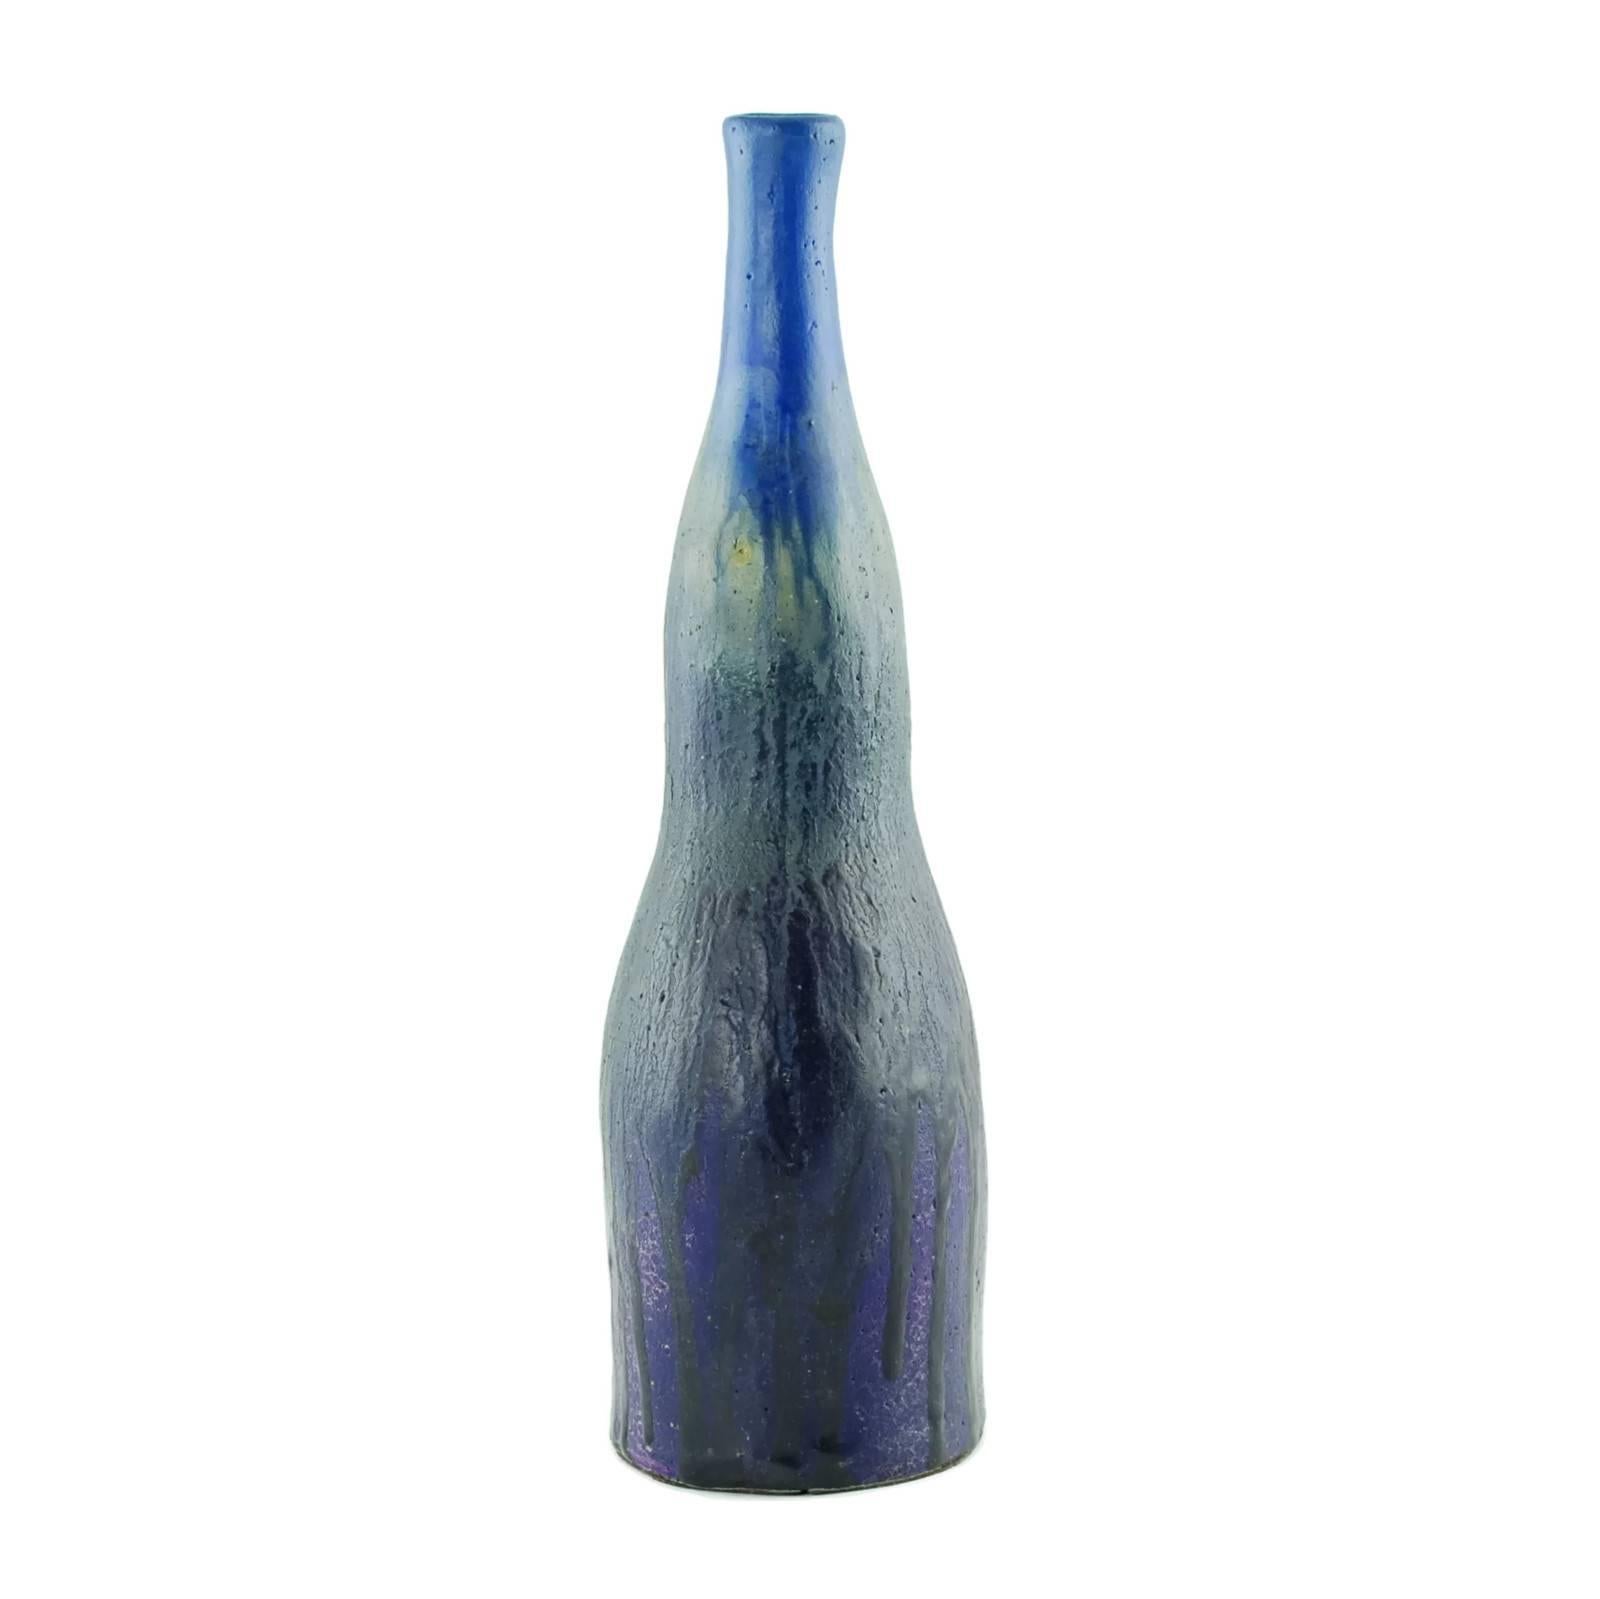 This hand decorated midcentury ceramic vase was designed by highly regarded Italian sculptor Marcello Fantoni for American importer Raymor. The 13